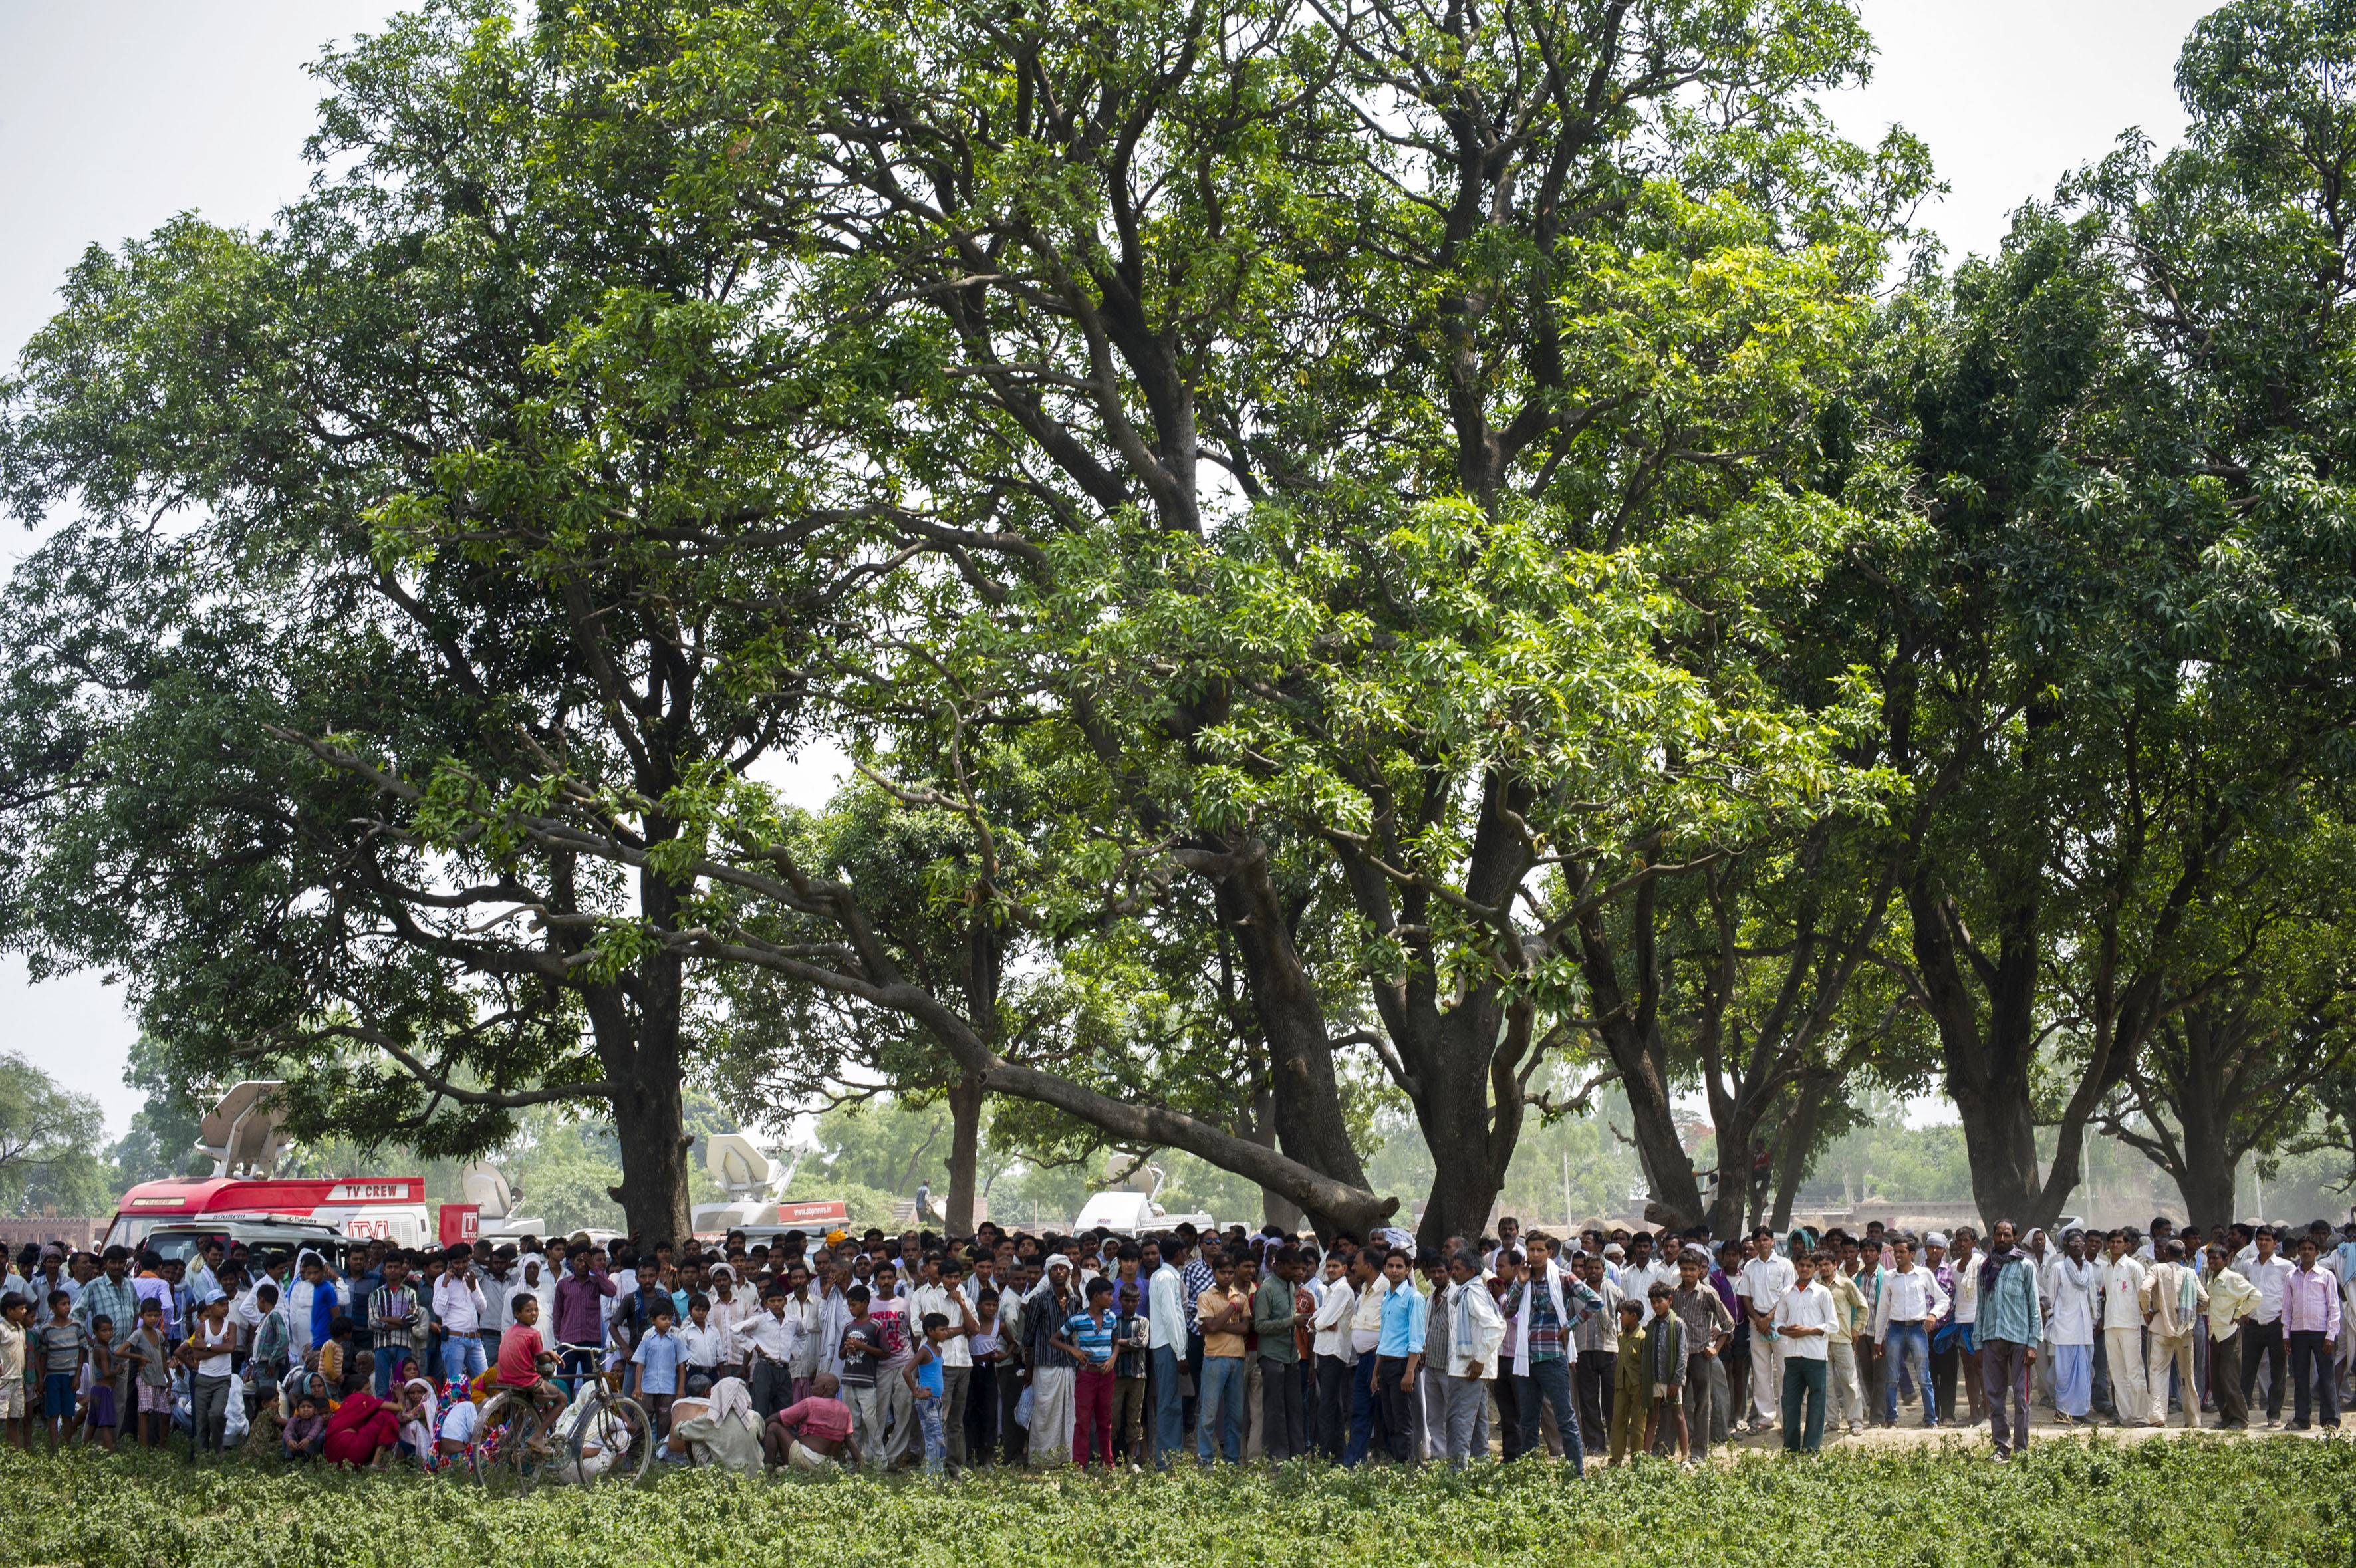 The grove of mango trees  where the two girls were hanged by mainly male villagers and media in Katra Sadatganj village, Uttar Pradesh, India on May 30, 2014.